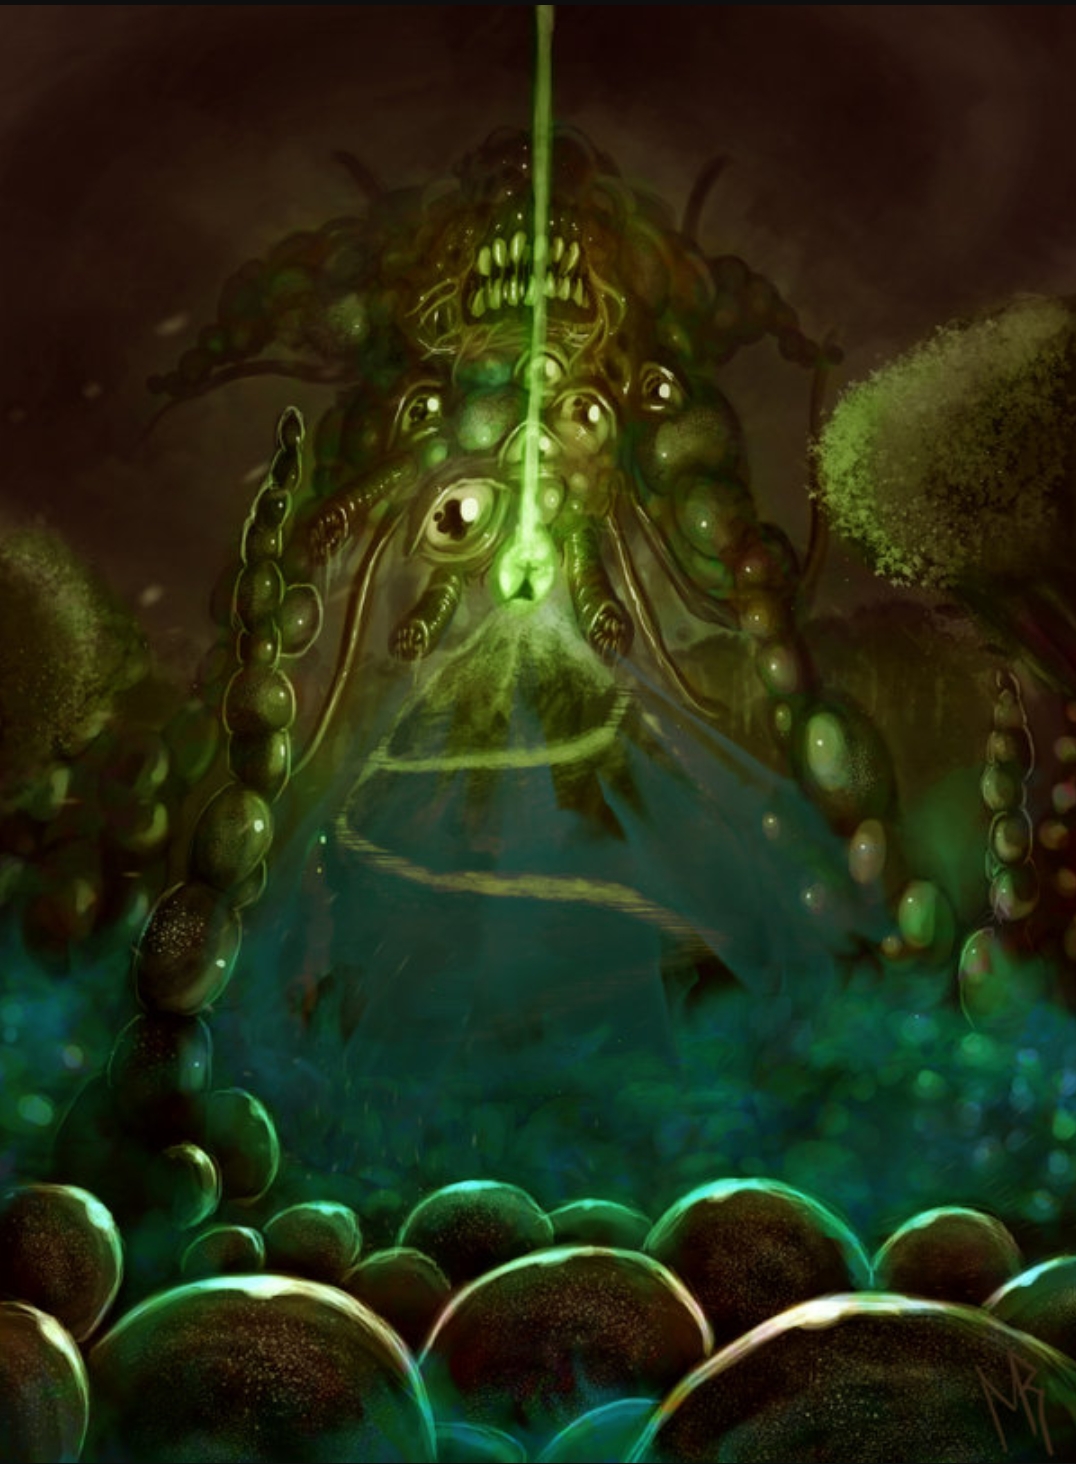 The Dream Cycle of H.P. Lovecraft by H.P. Lovecraft